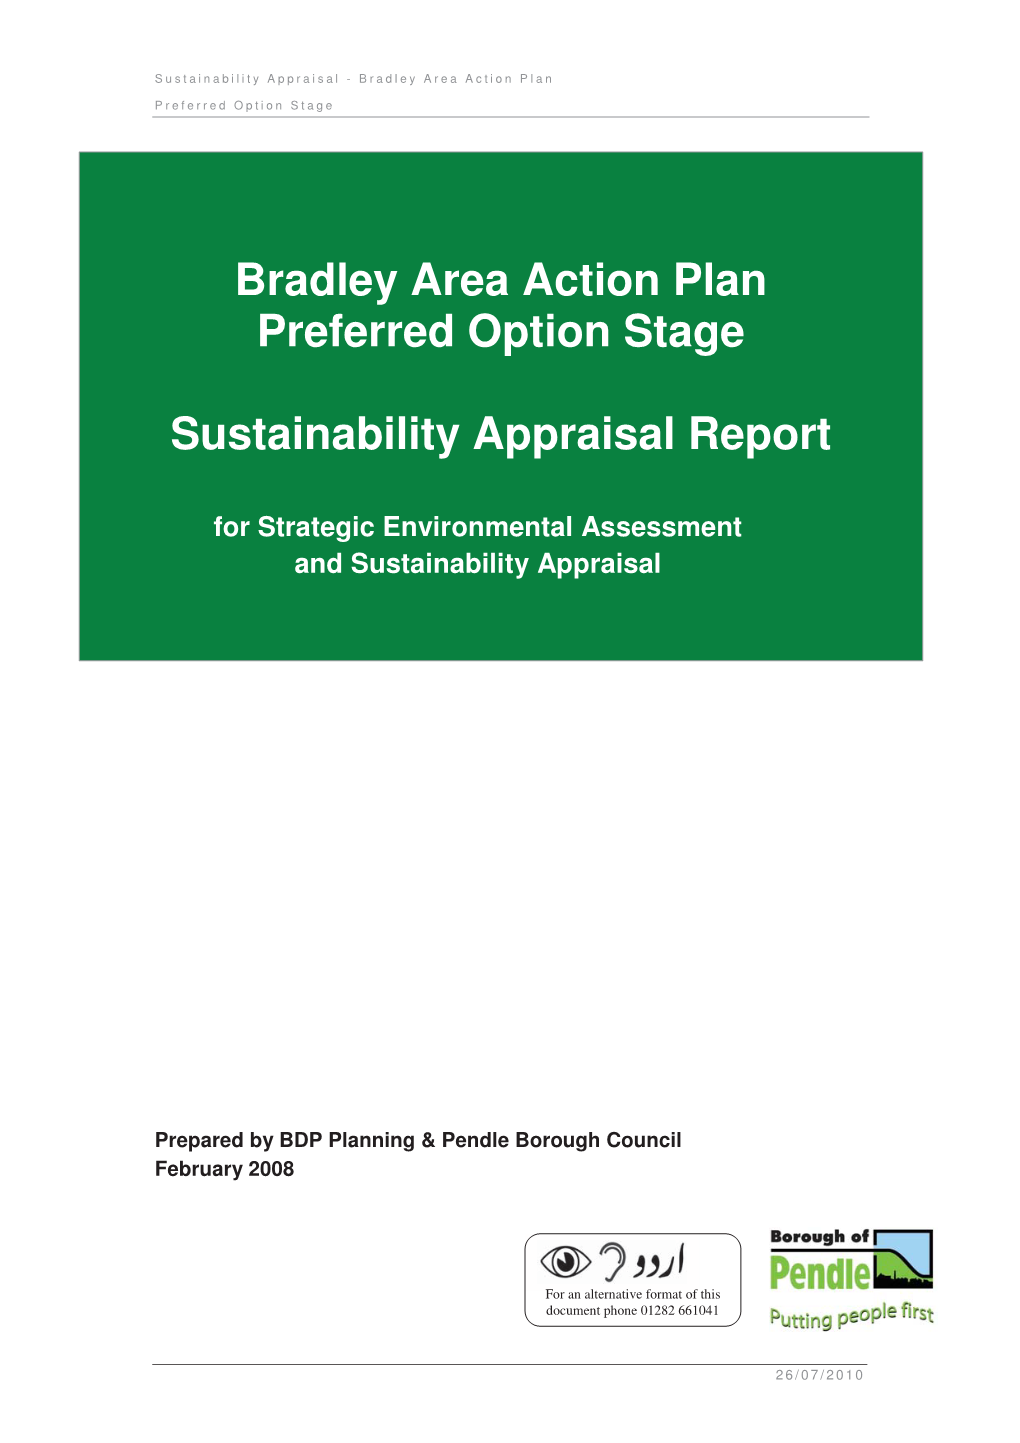 Download Bradley Area Action Plan Sustainability Appraisal Report